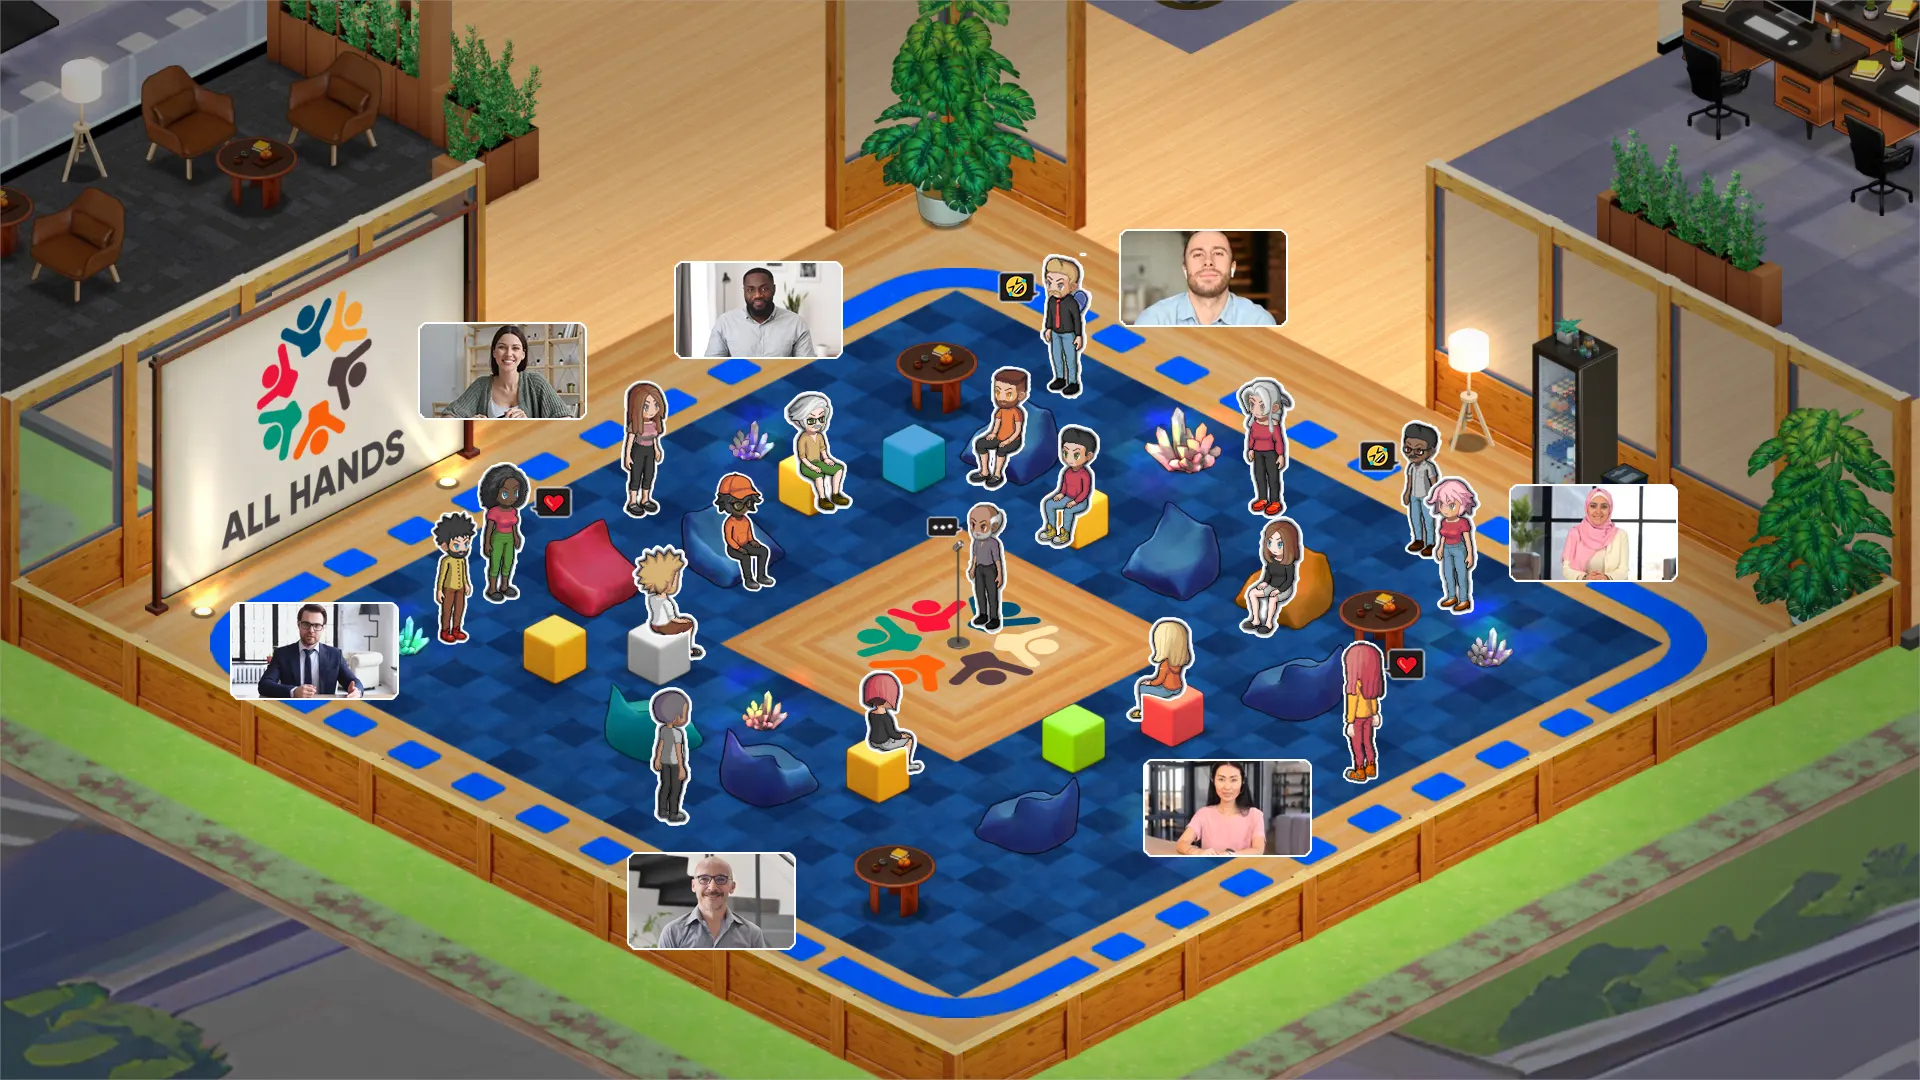 An image of a team video meeting in a meeting zone